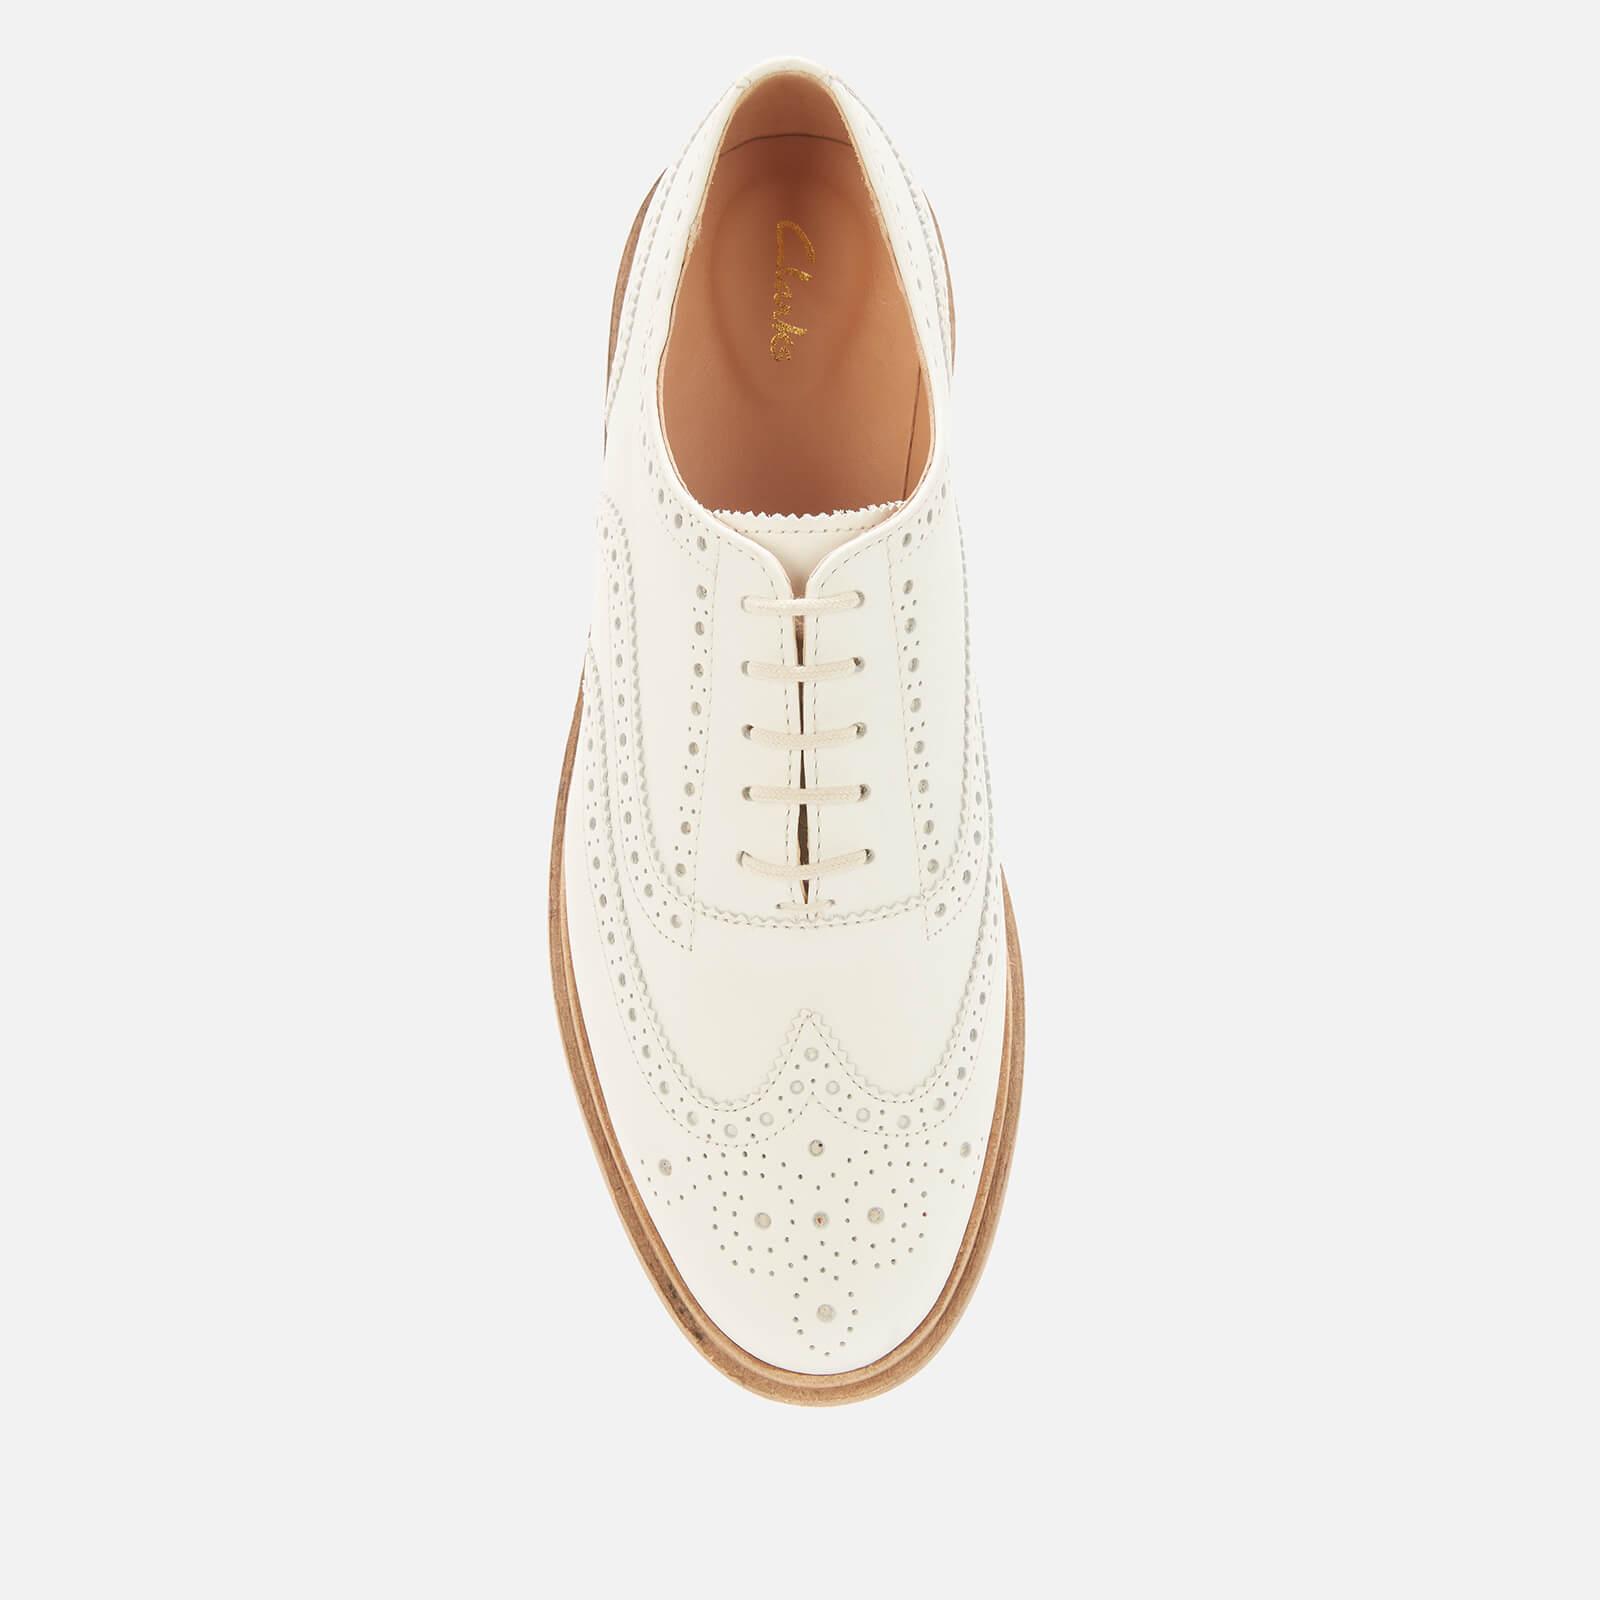 Clarks Baille Leather Brogues in White | Lyst